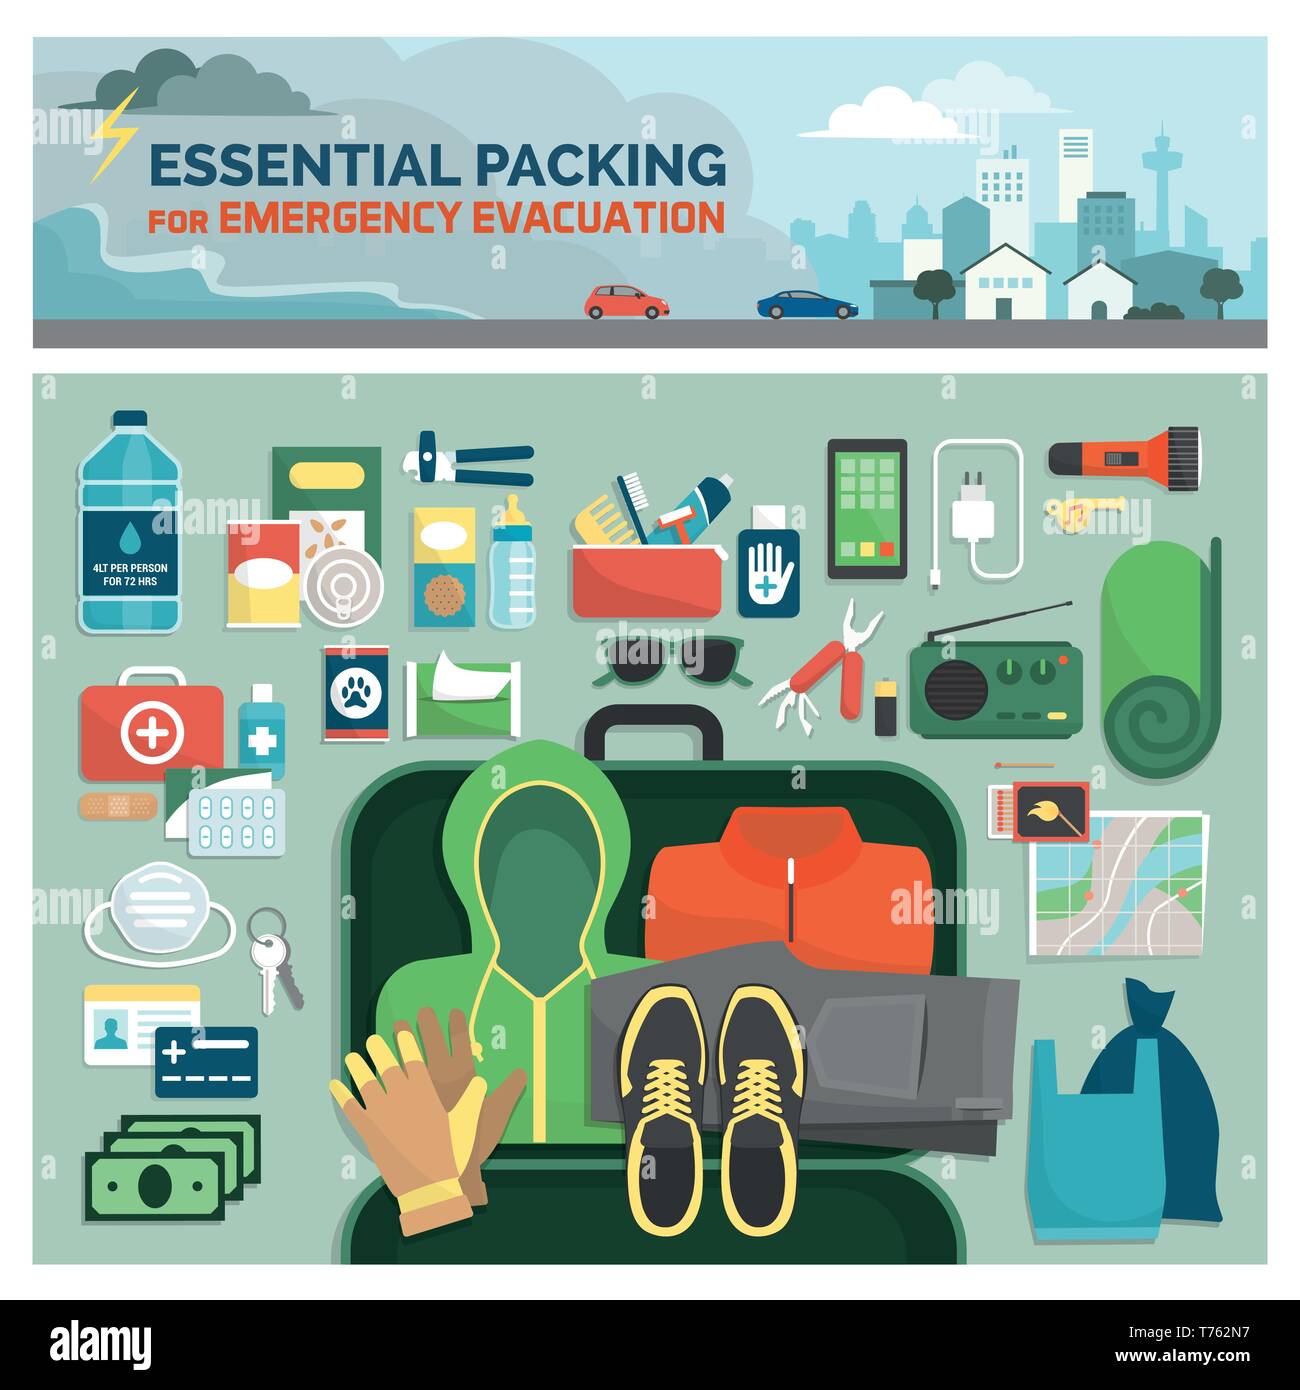 Essential packing kit for emergency evacuation, emergency preparedness and safety guide, flat lay objects and tools Stock Vector